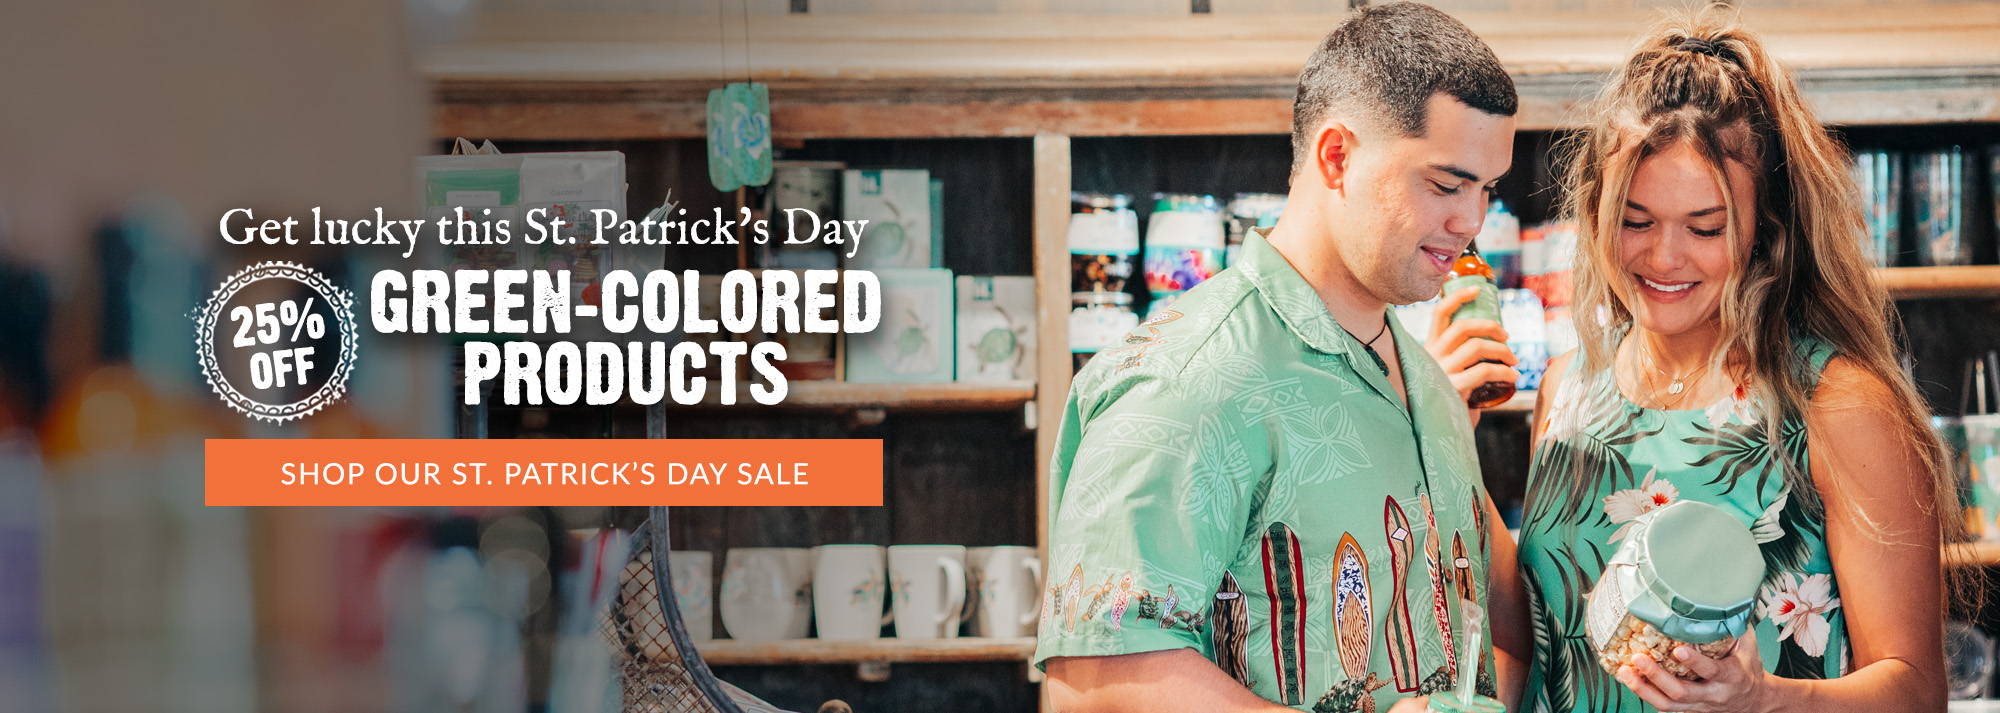 St. Patrick's Day is here and we're feeling lucky! To celebrate the occasion, we're offering 20% off our green products.